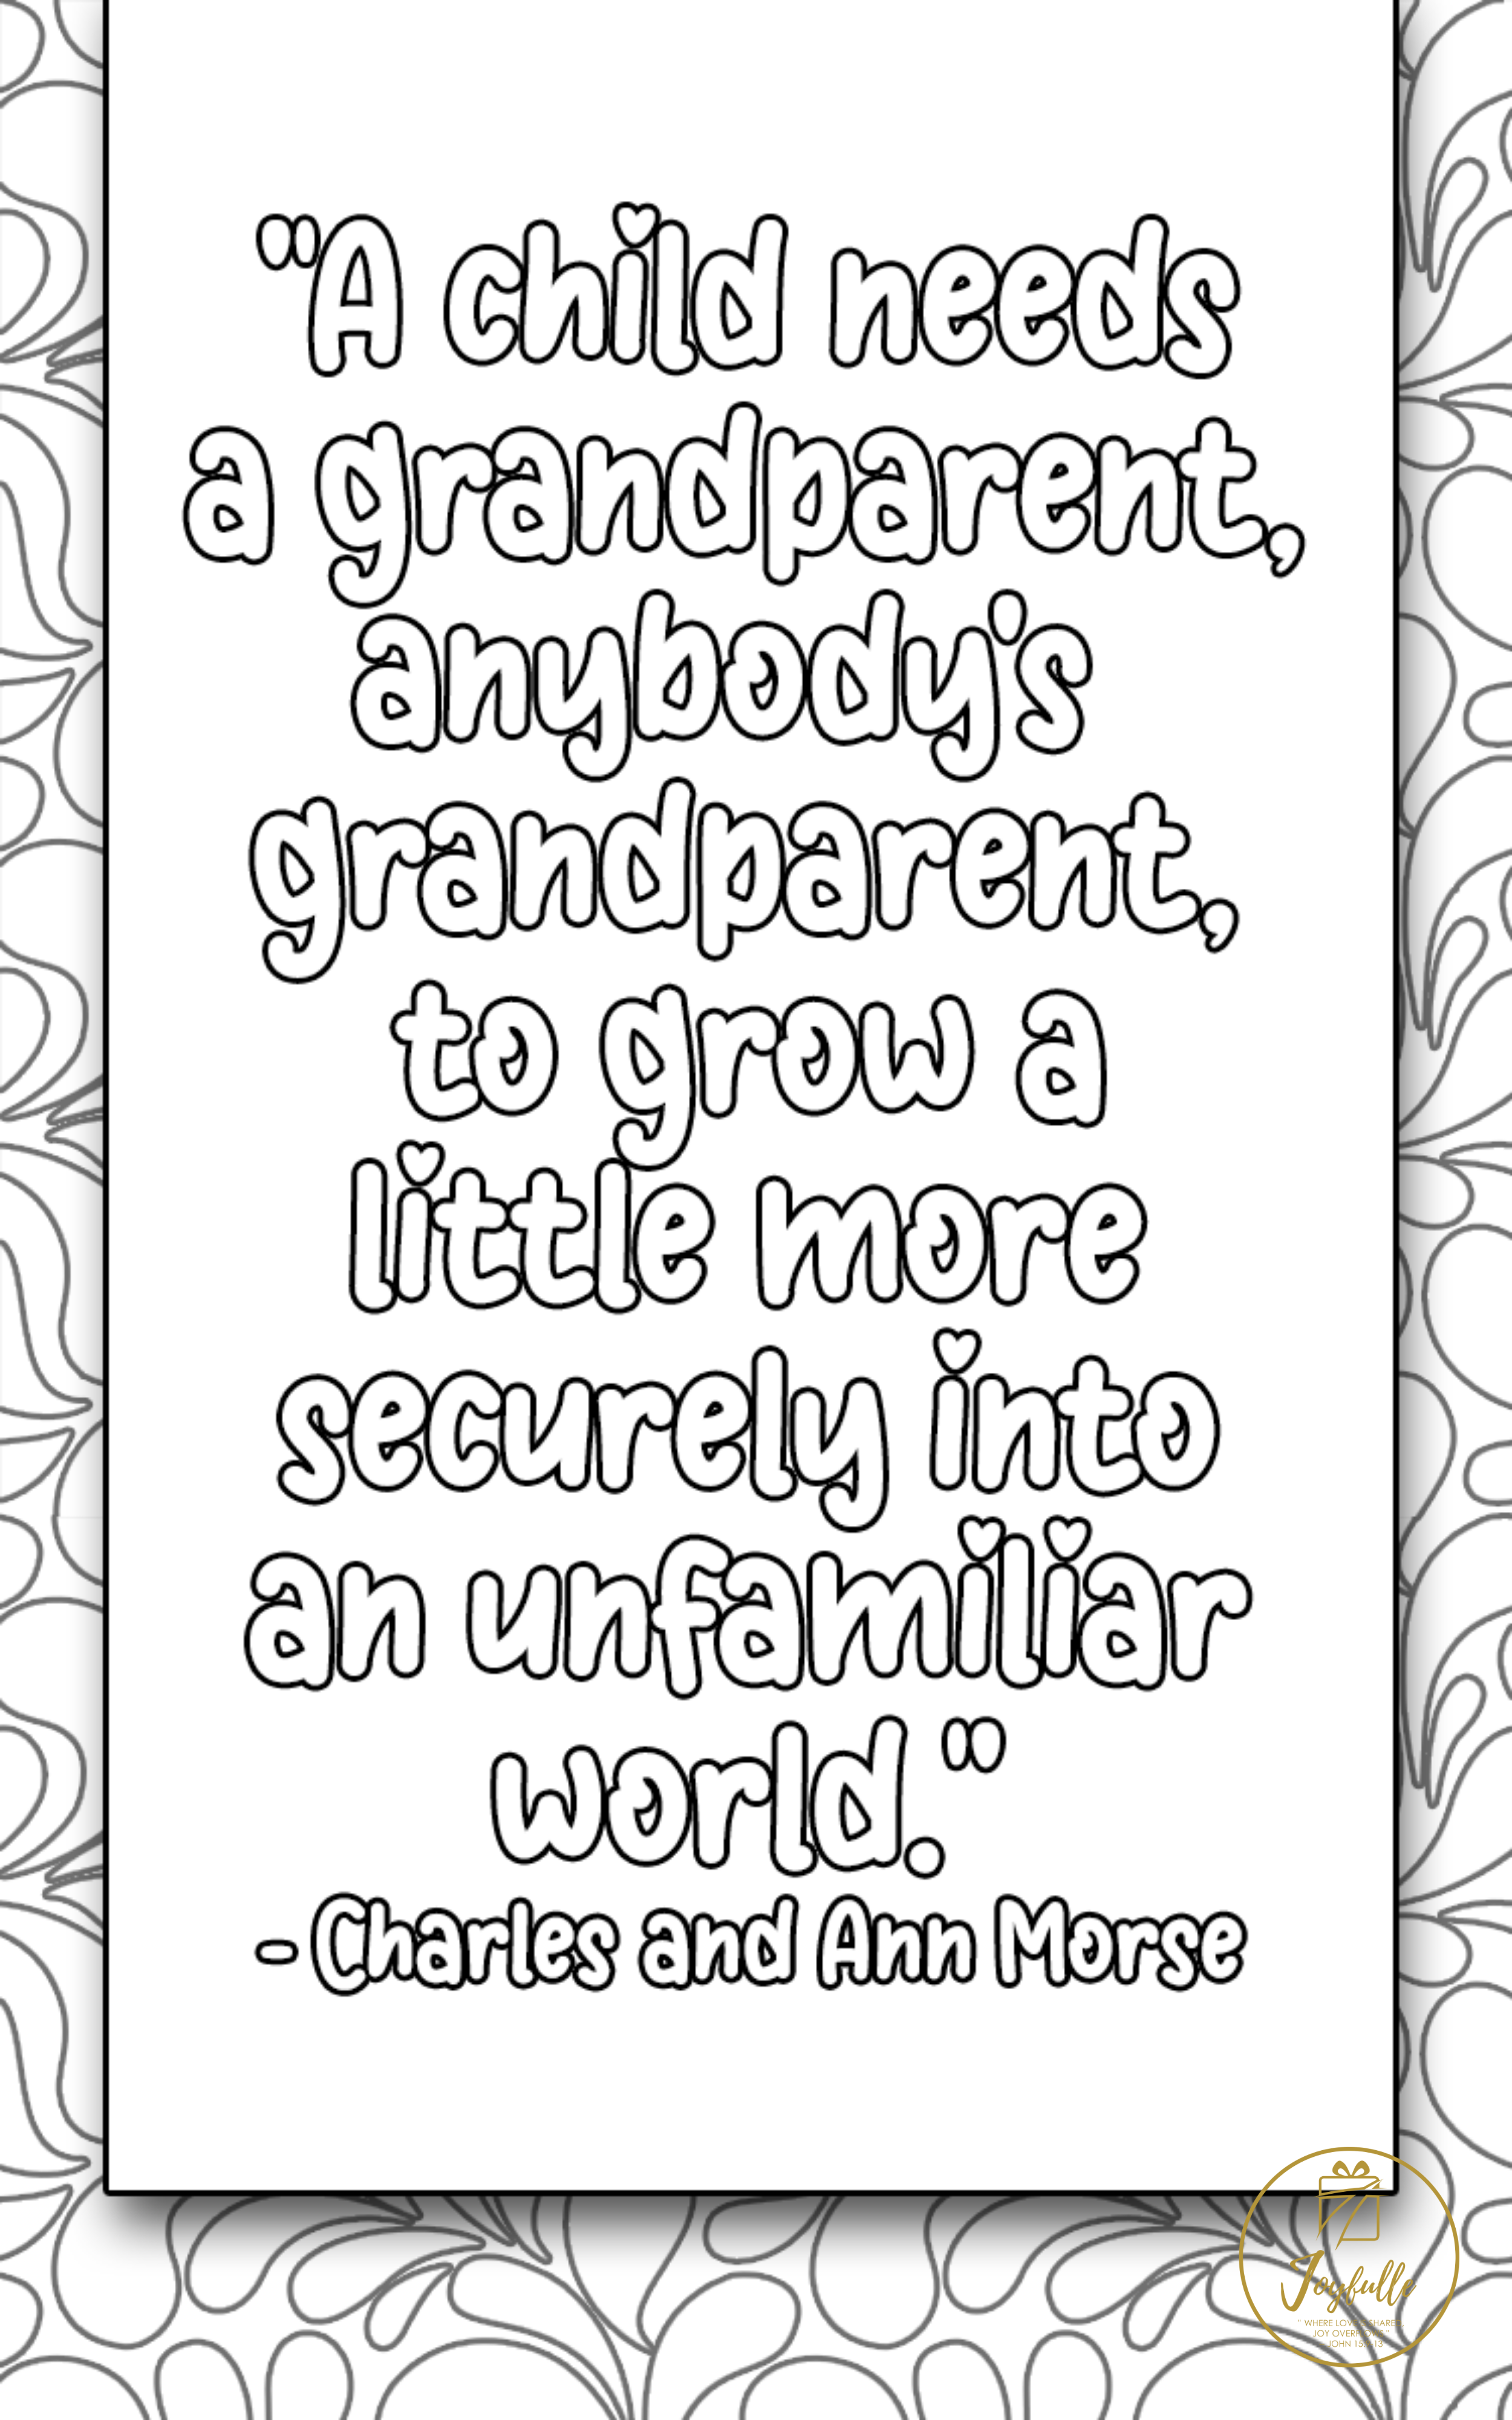 Grandparents Day Greeting Card 16